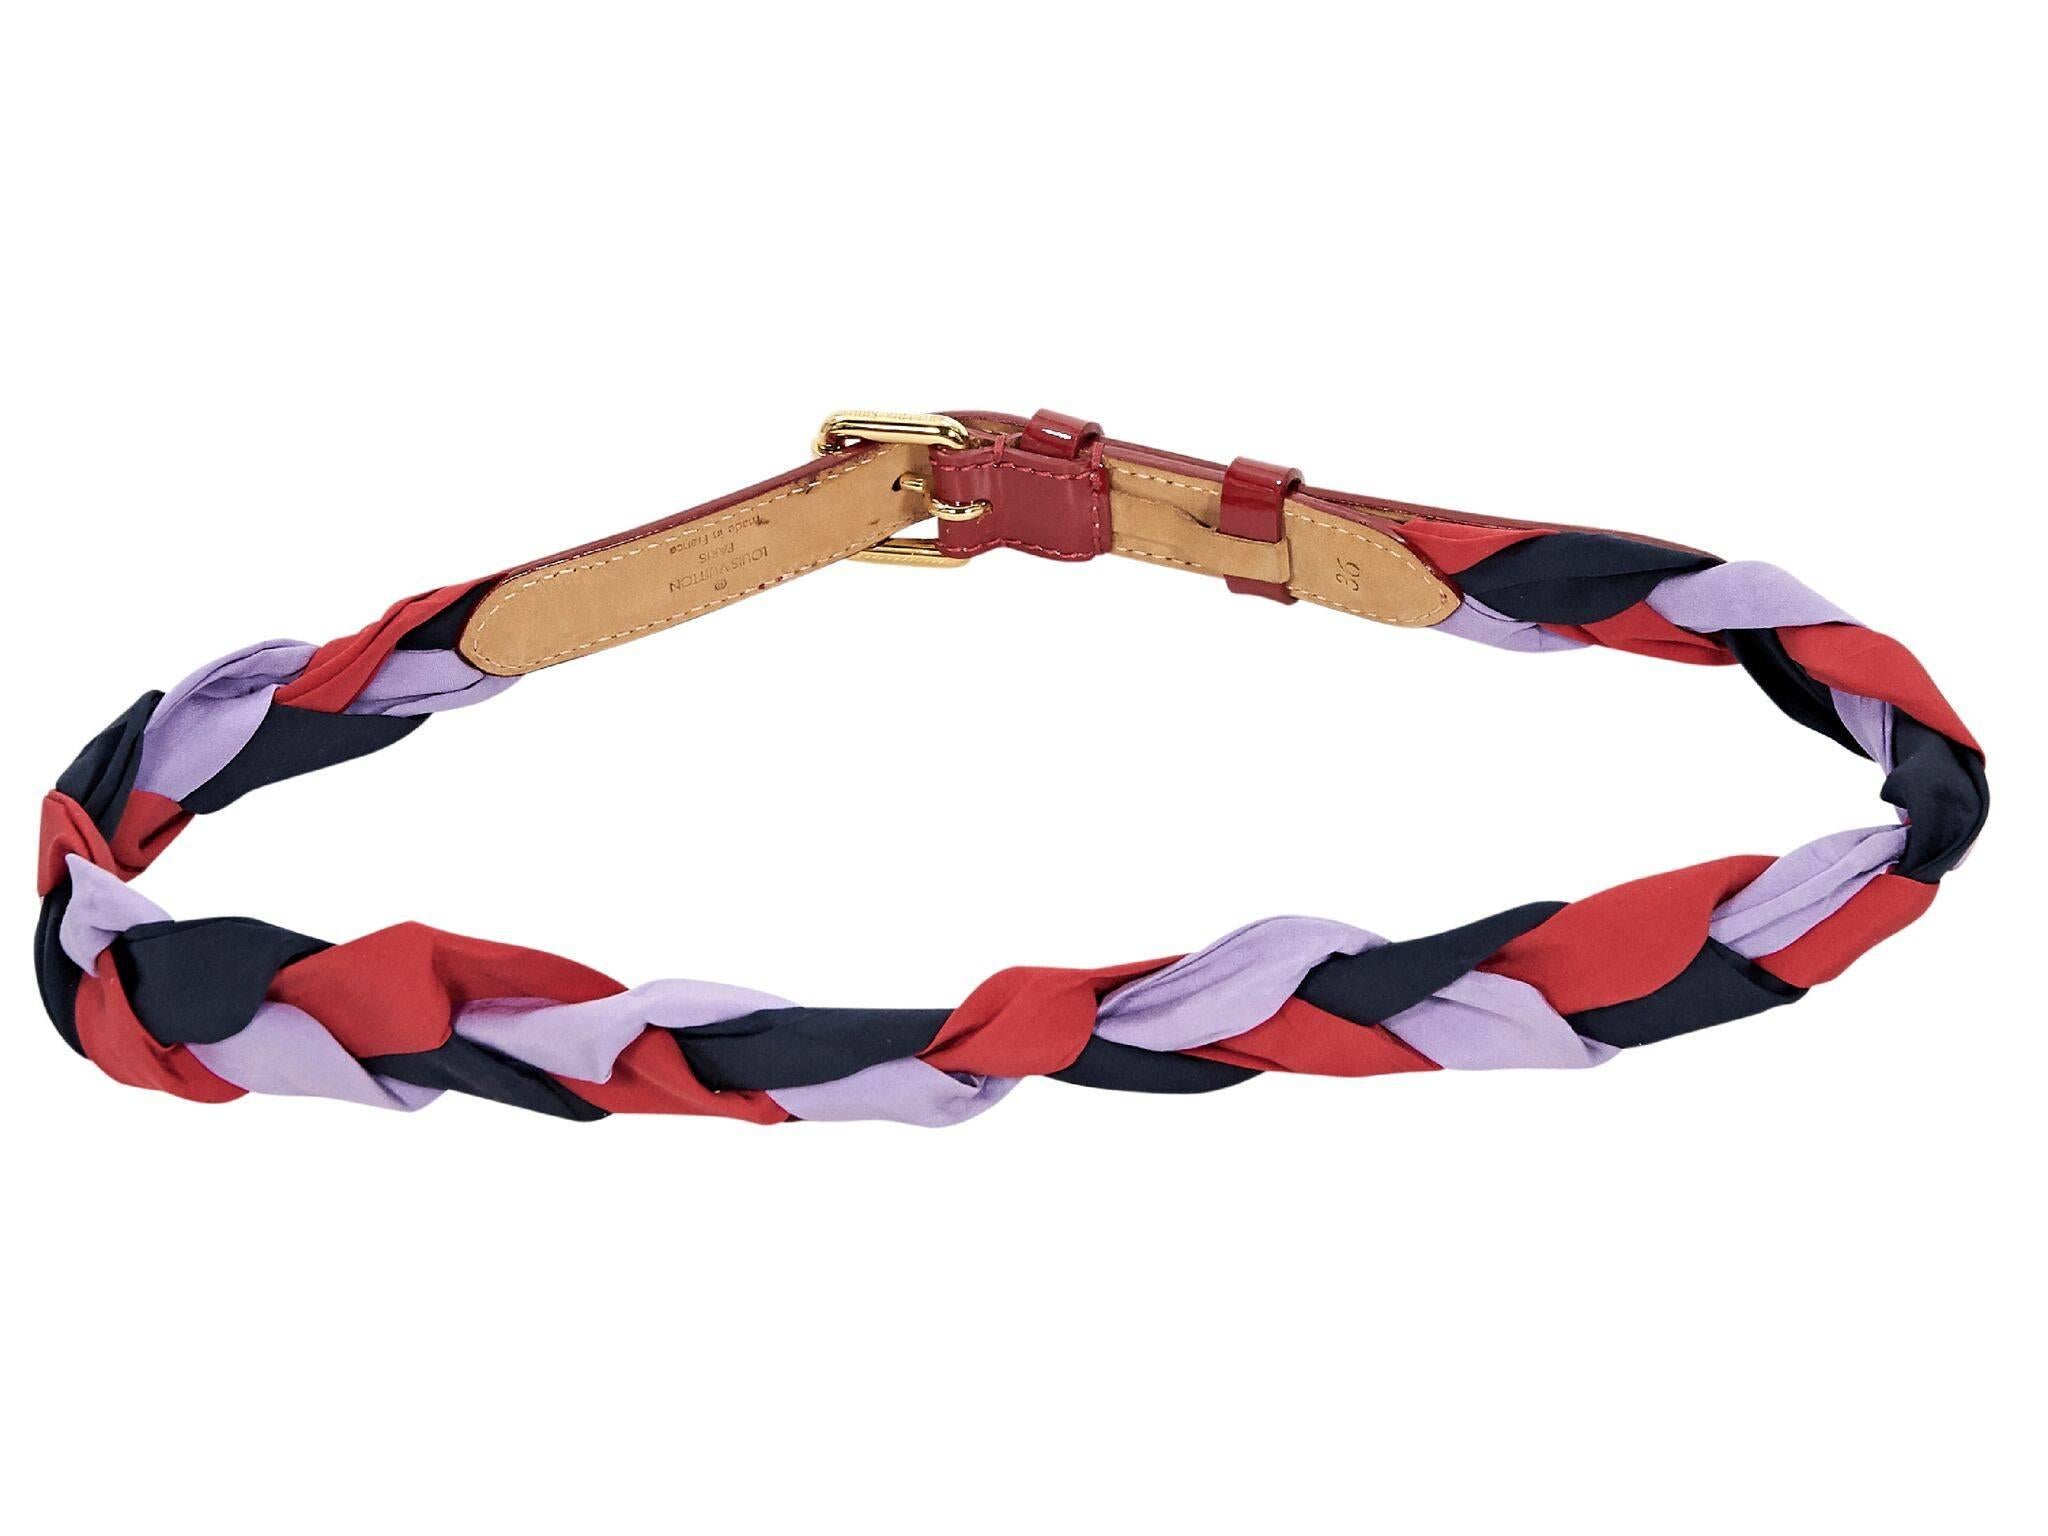 Product details:  Red and purple braided belt by Louis Vuitton.  Trimmed wiht red patent leather.  Adjustable buckle closure.  Goldtone hardware.  Label size FR 36.  33